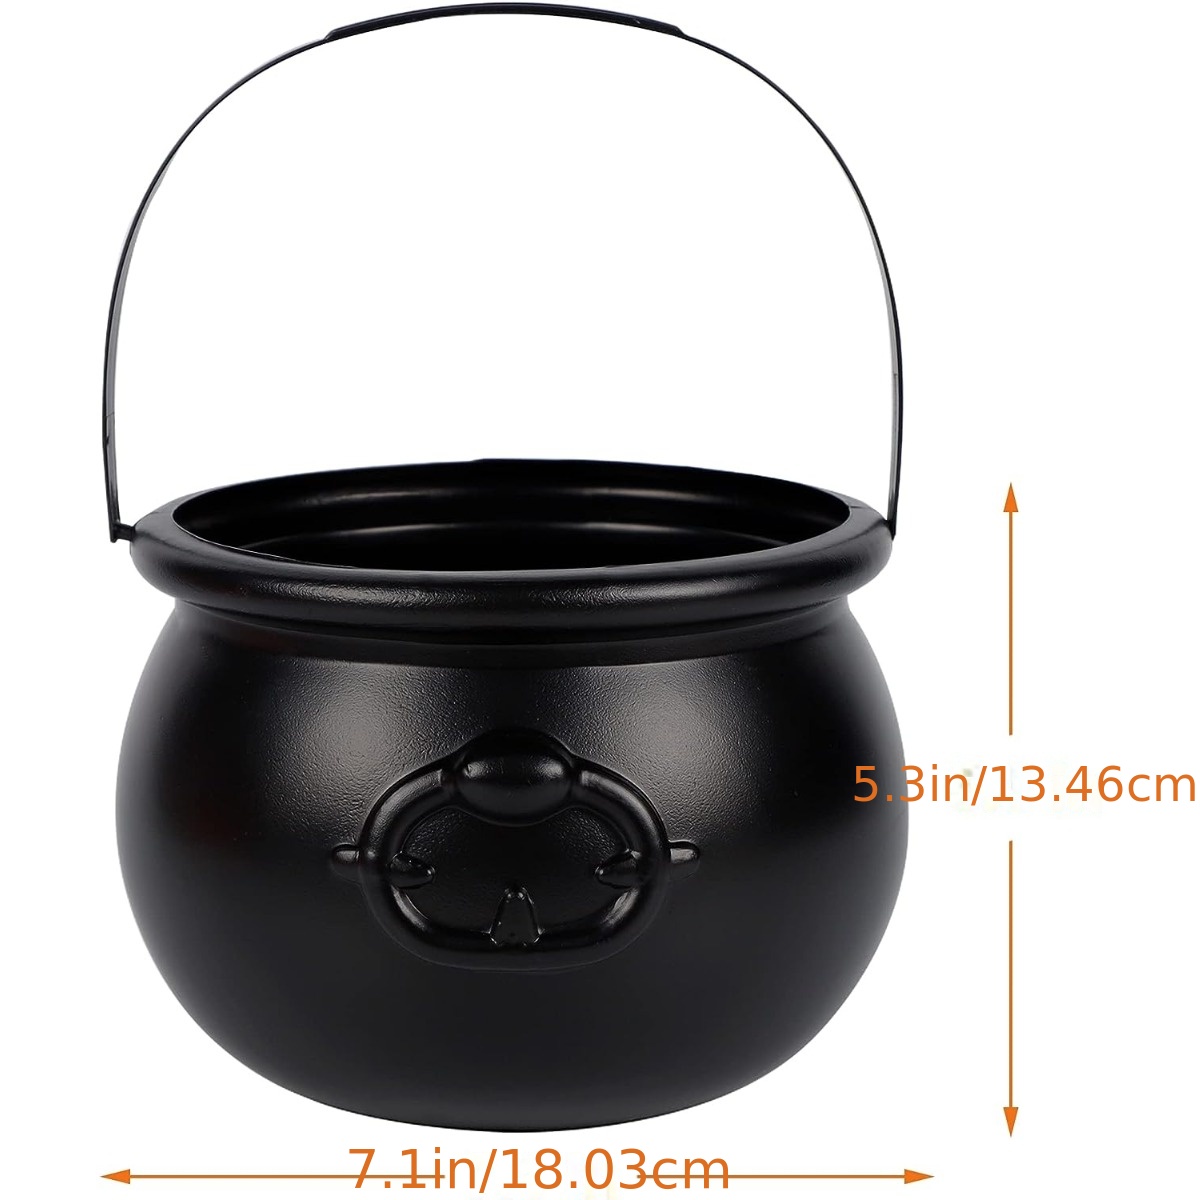 https://img.kwcdn.com/product/fancyalgo/toaster-api/toaster-processor-image-cm2in/b90e07b6-4bfd-11ee-82d8-0a580a69767f.jpg?imageMogr2/auto-orient%7CimageView2/2/w/800/q/70/format/webp